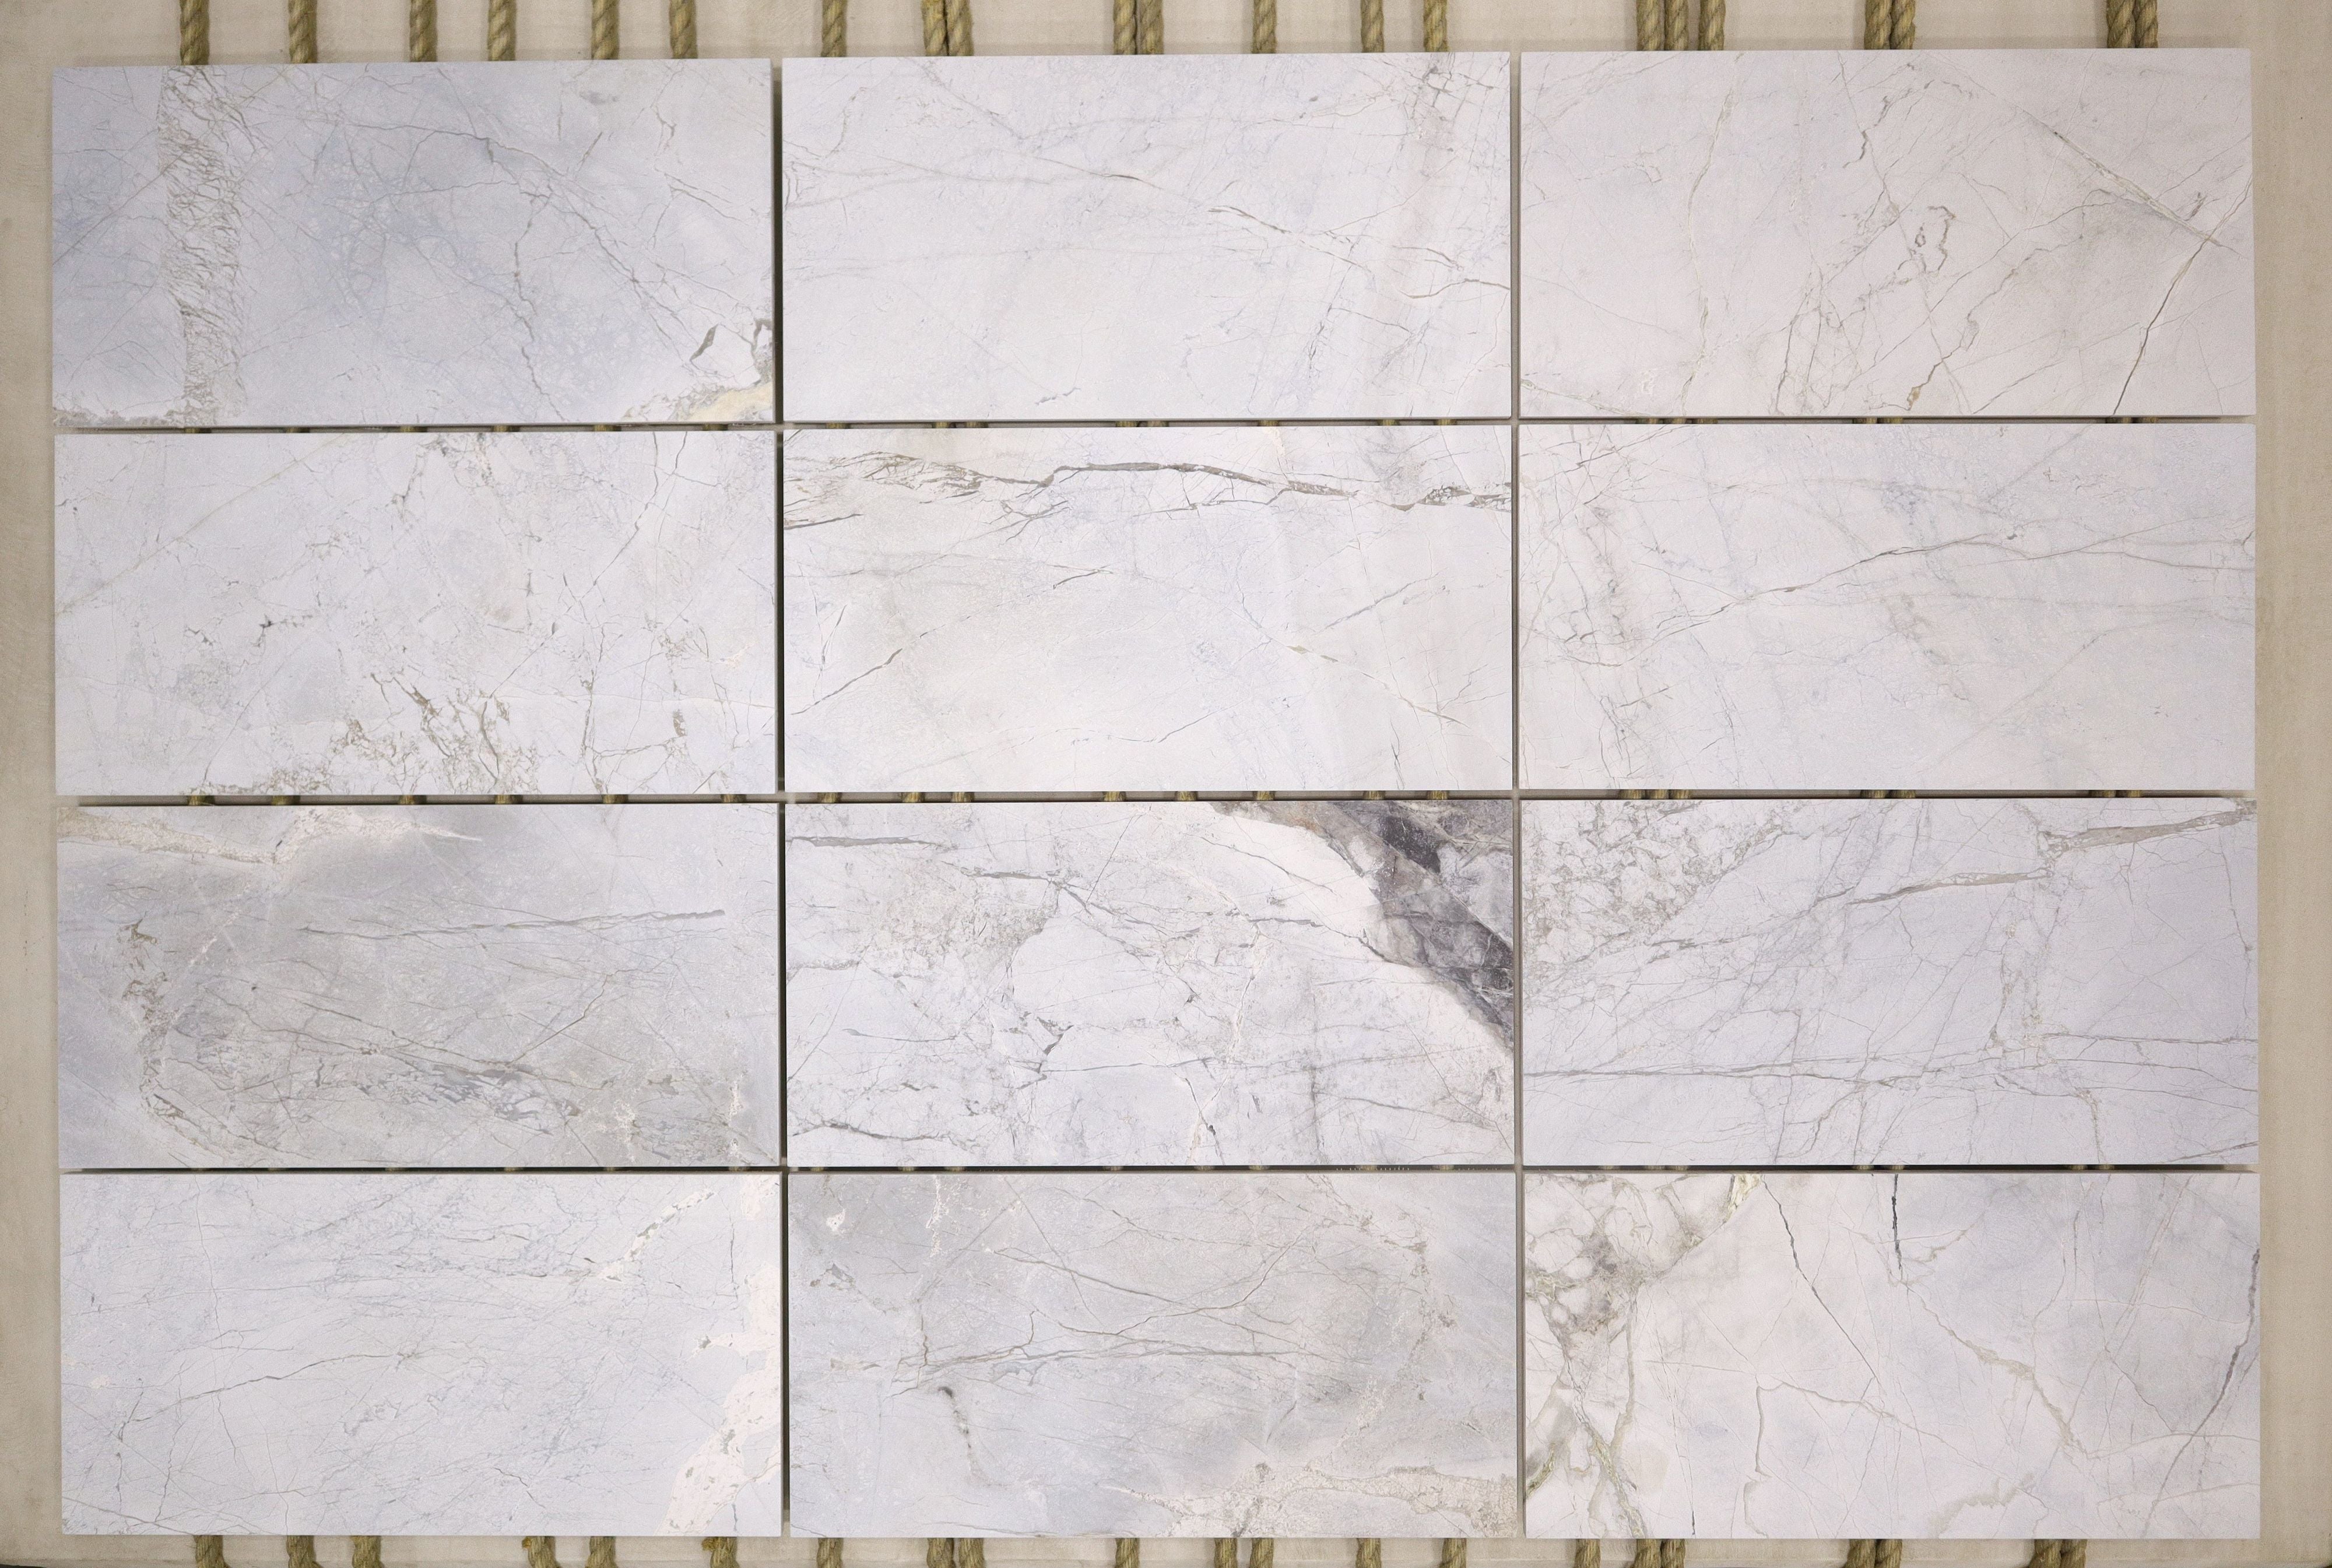  Invisible%20Blue%20Marble%20Tile%20%20Honed%2012%22%20x%2024%22%20x%201/2%22%20Stone%20Straight%20Edge 